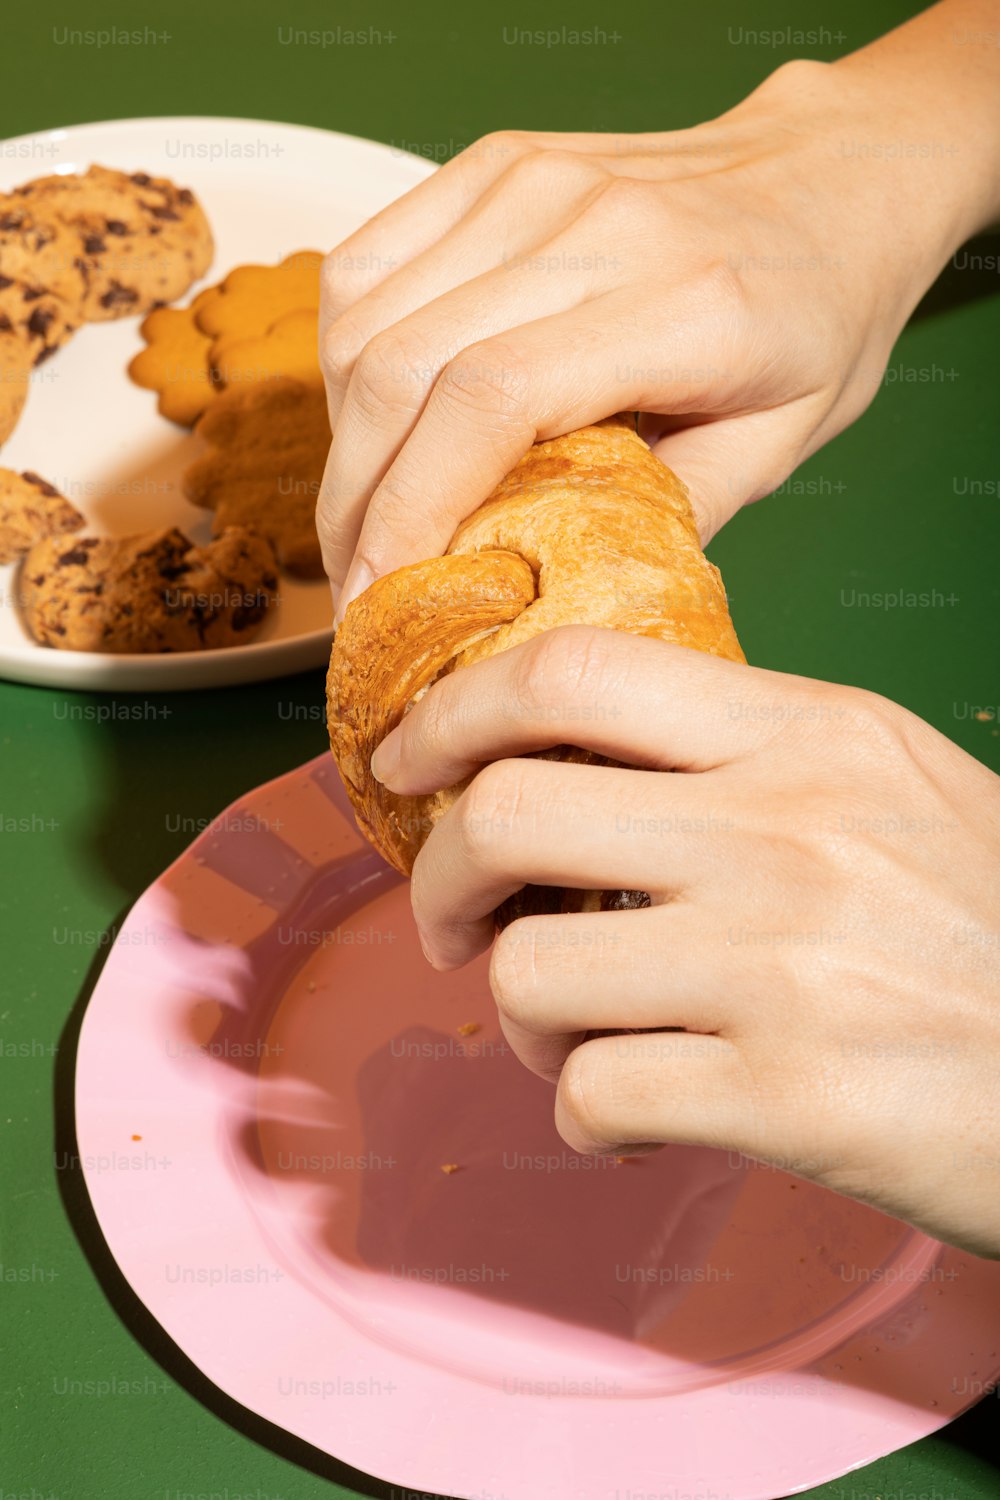 a person holding a doughnut in front of a plate of cookies